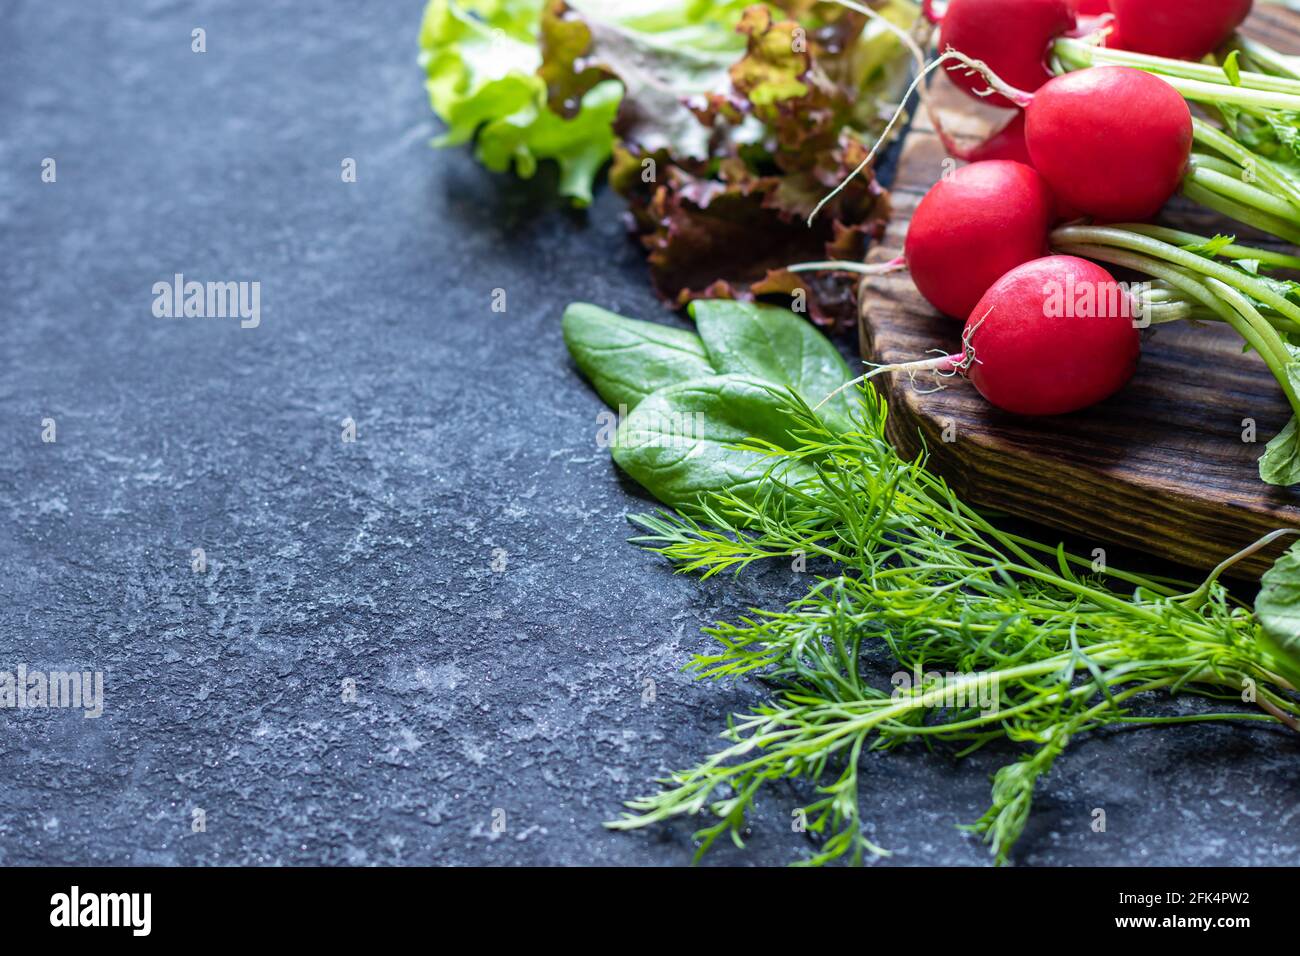 Set with fresh organic vegetables from farm Stock Photo